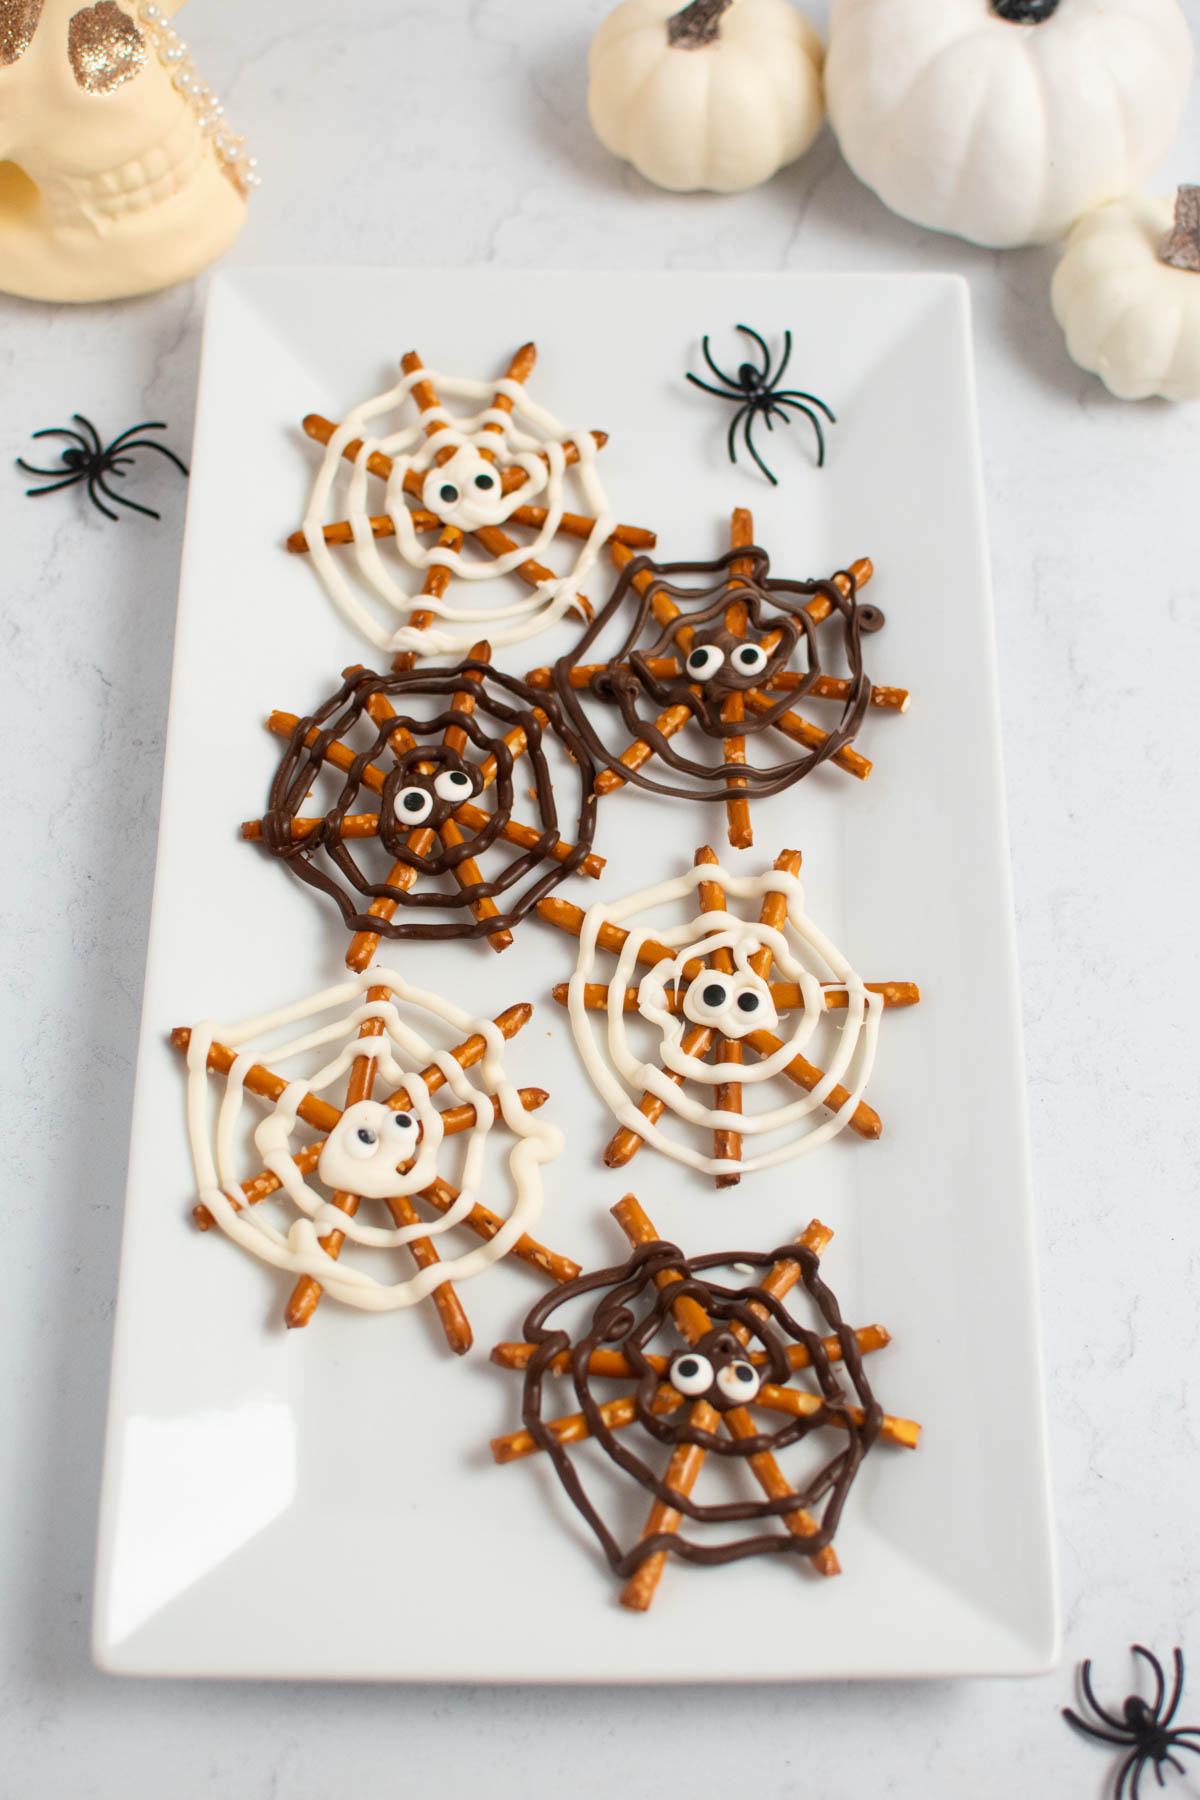 Pretzel spider webs with candy eyes on platter with plastic spiders and pumpkins.